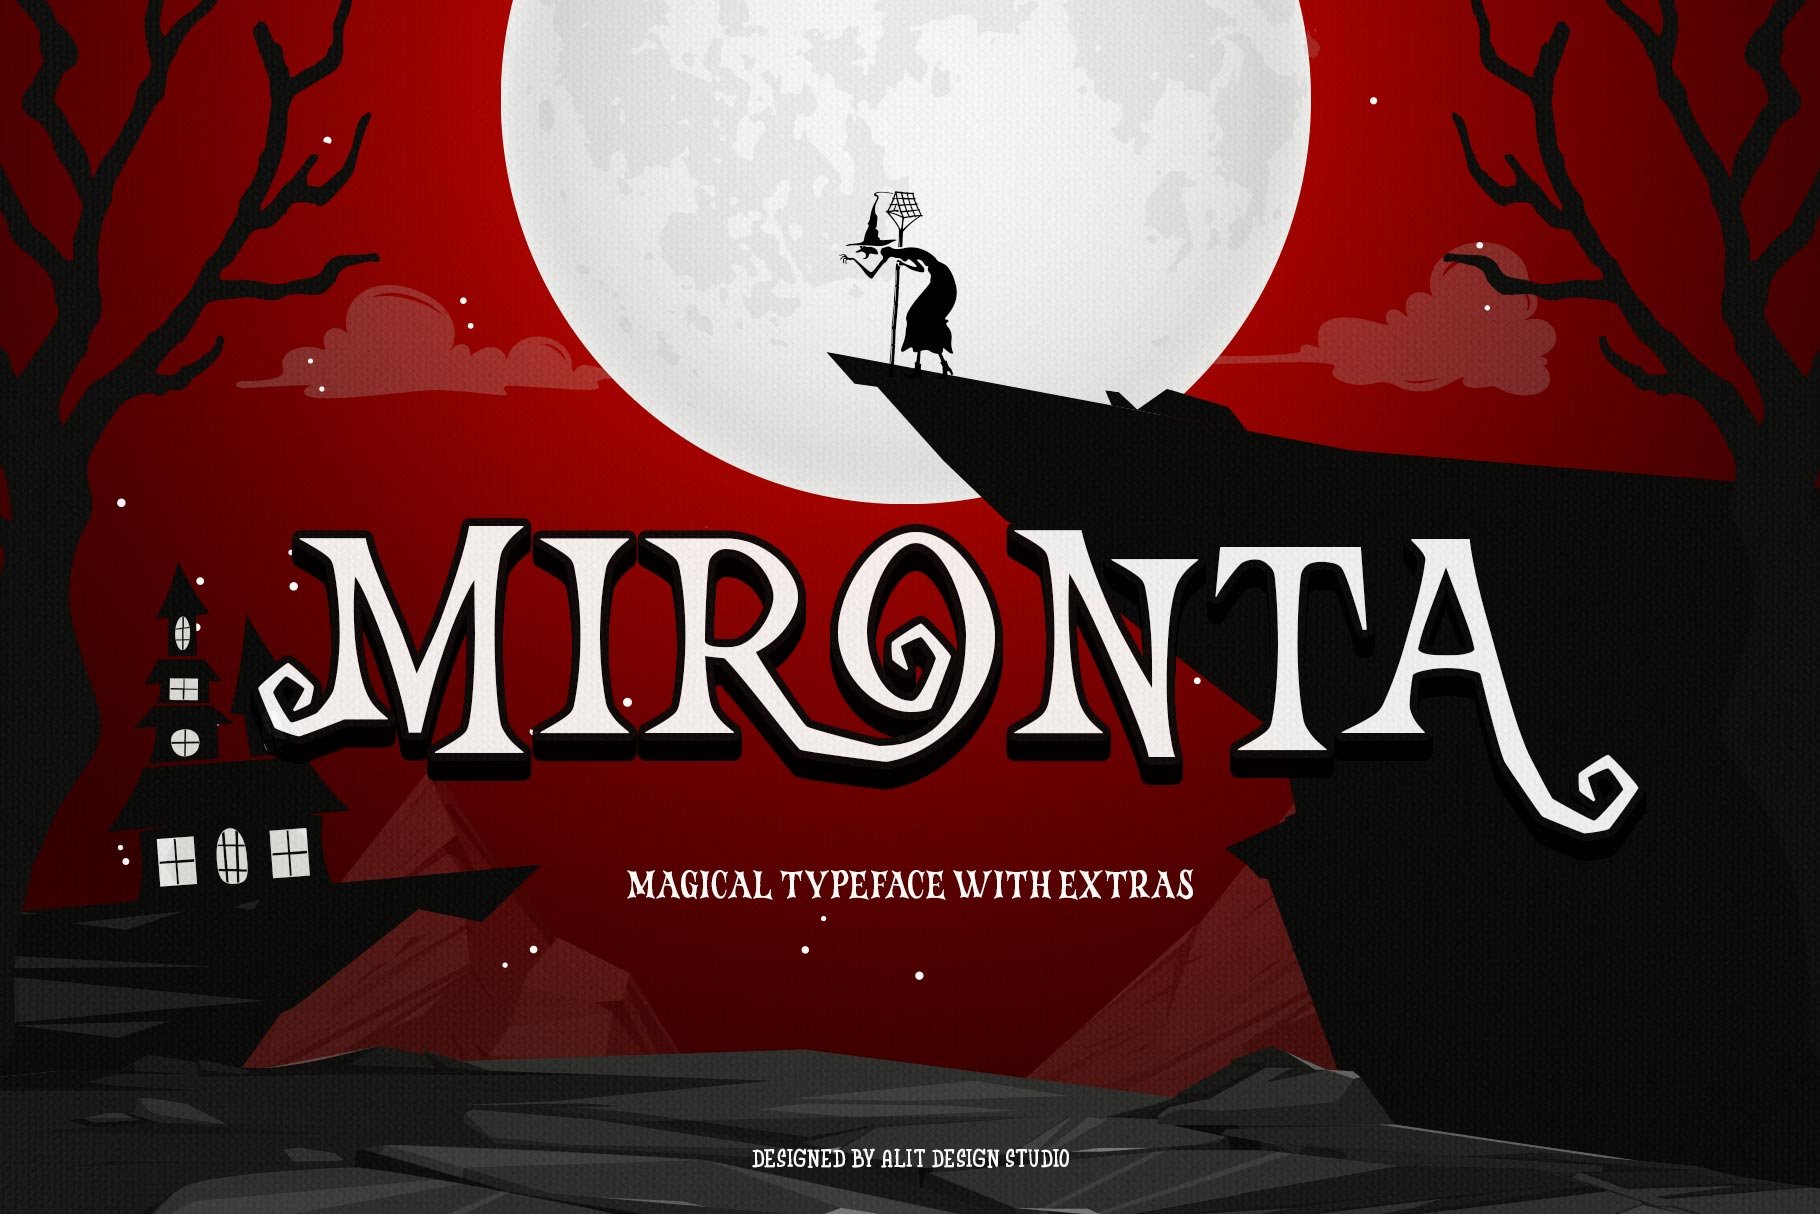 Mironta Halloween Font cover image.